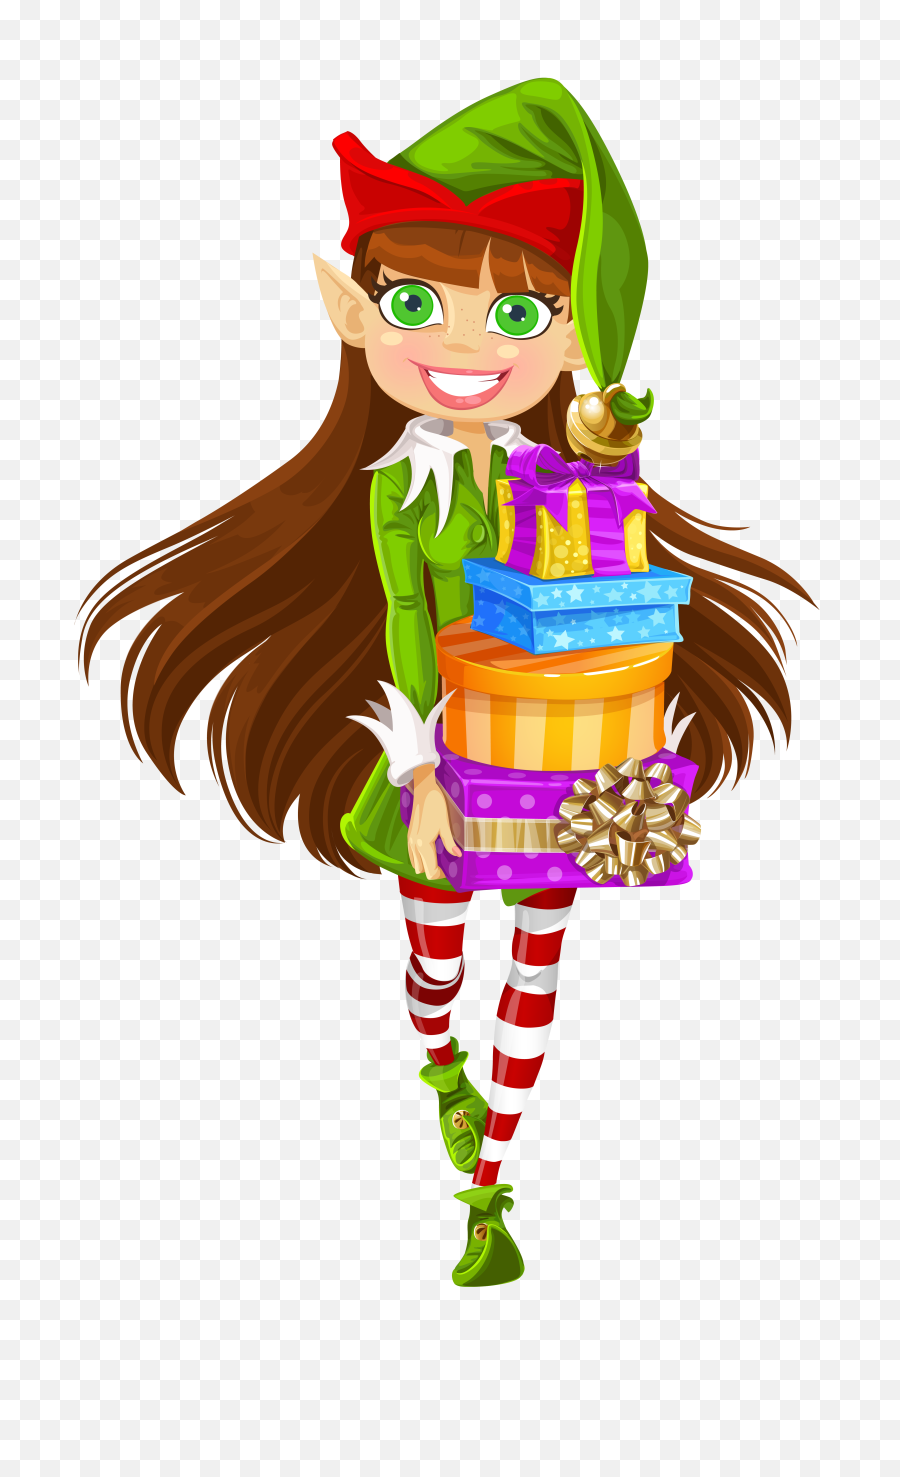 Gifts Png And Vectors For Free Download - Dlpngcom Christmas Elves Clip Art,Christmas Gifts Png